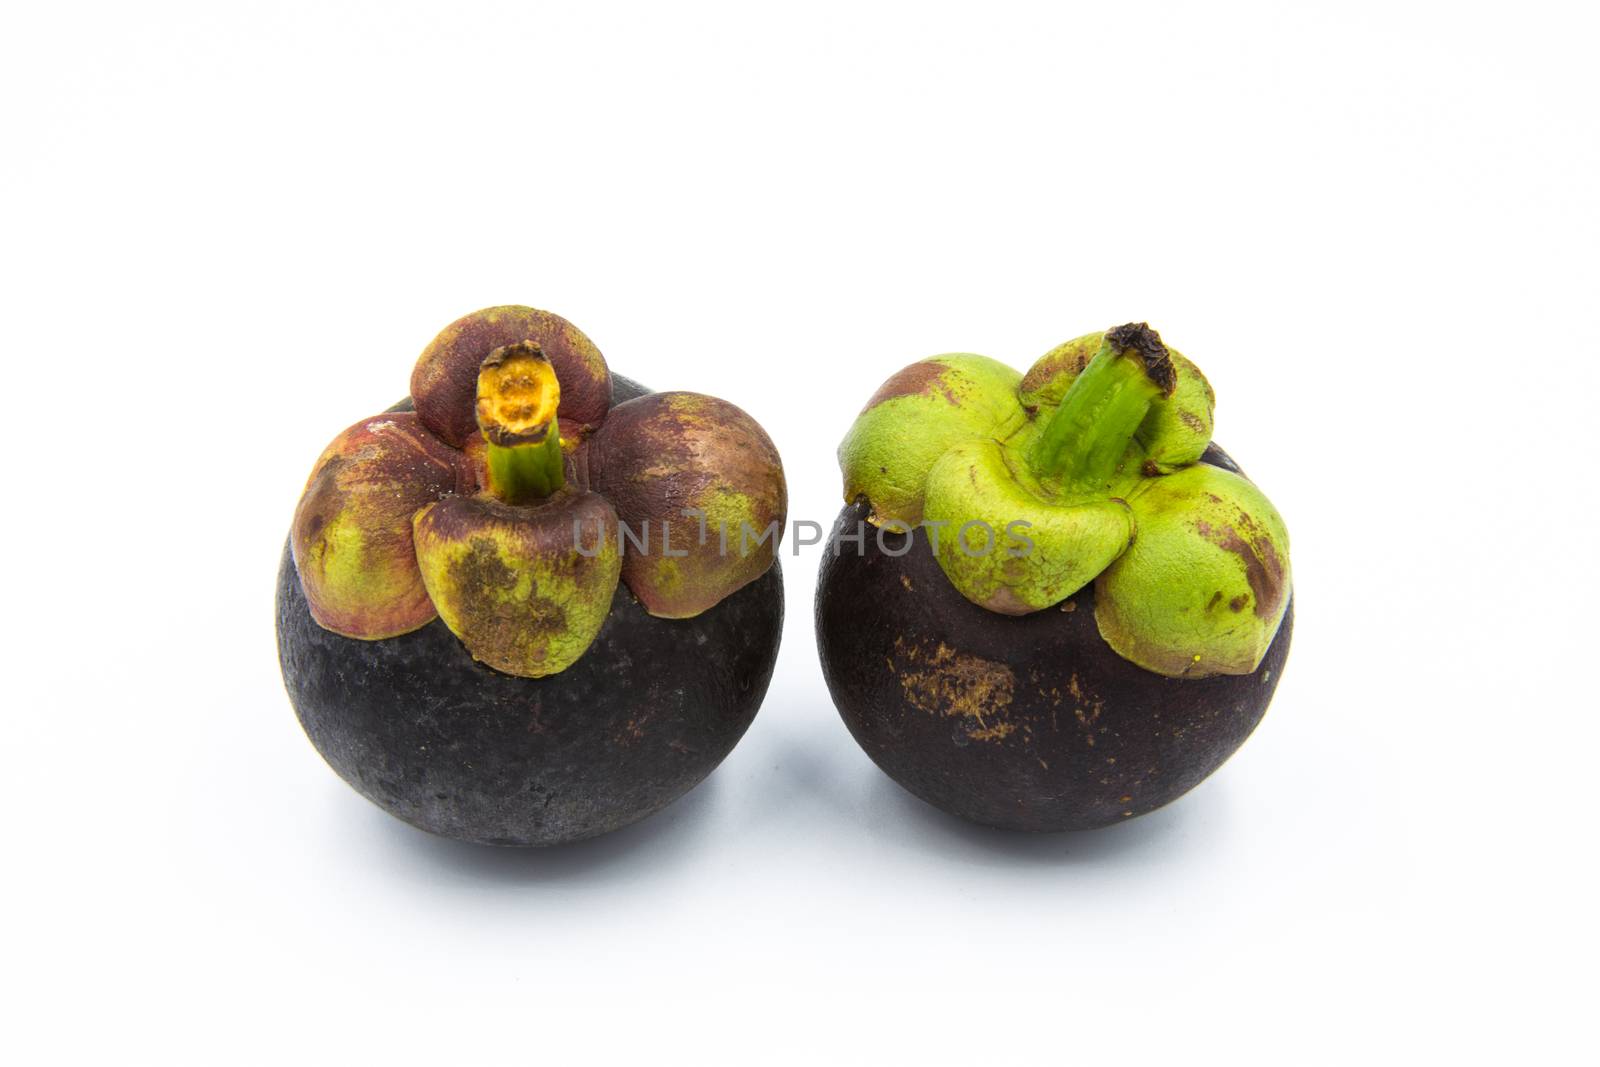 Two mangosteen placed on the white ground.